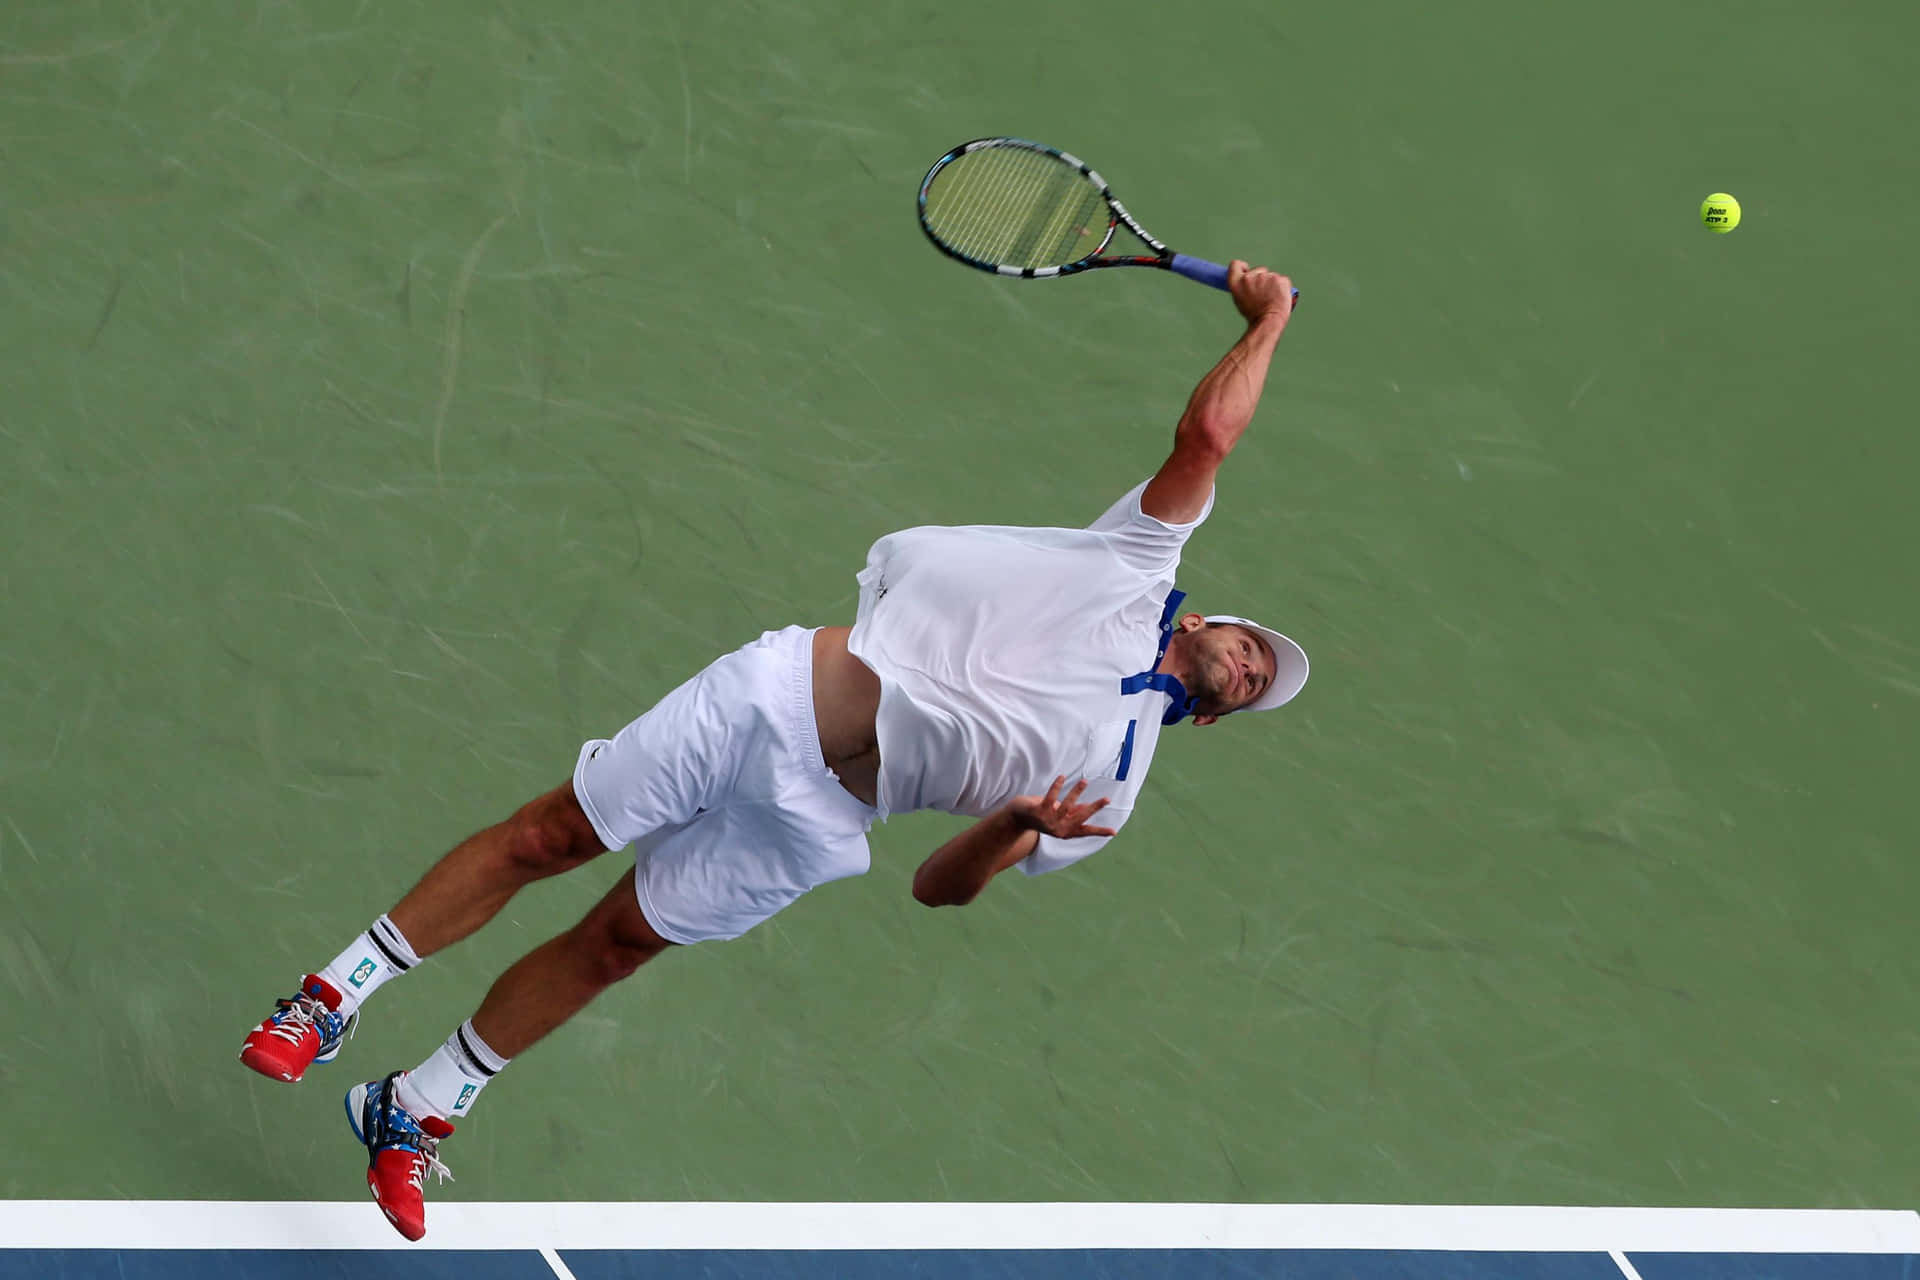 Andy Roddick delivering a power-packed tennis smash mid-air. Wallpaper